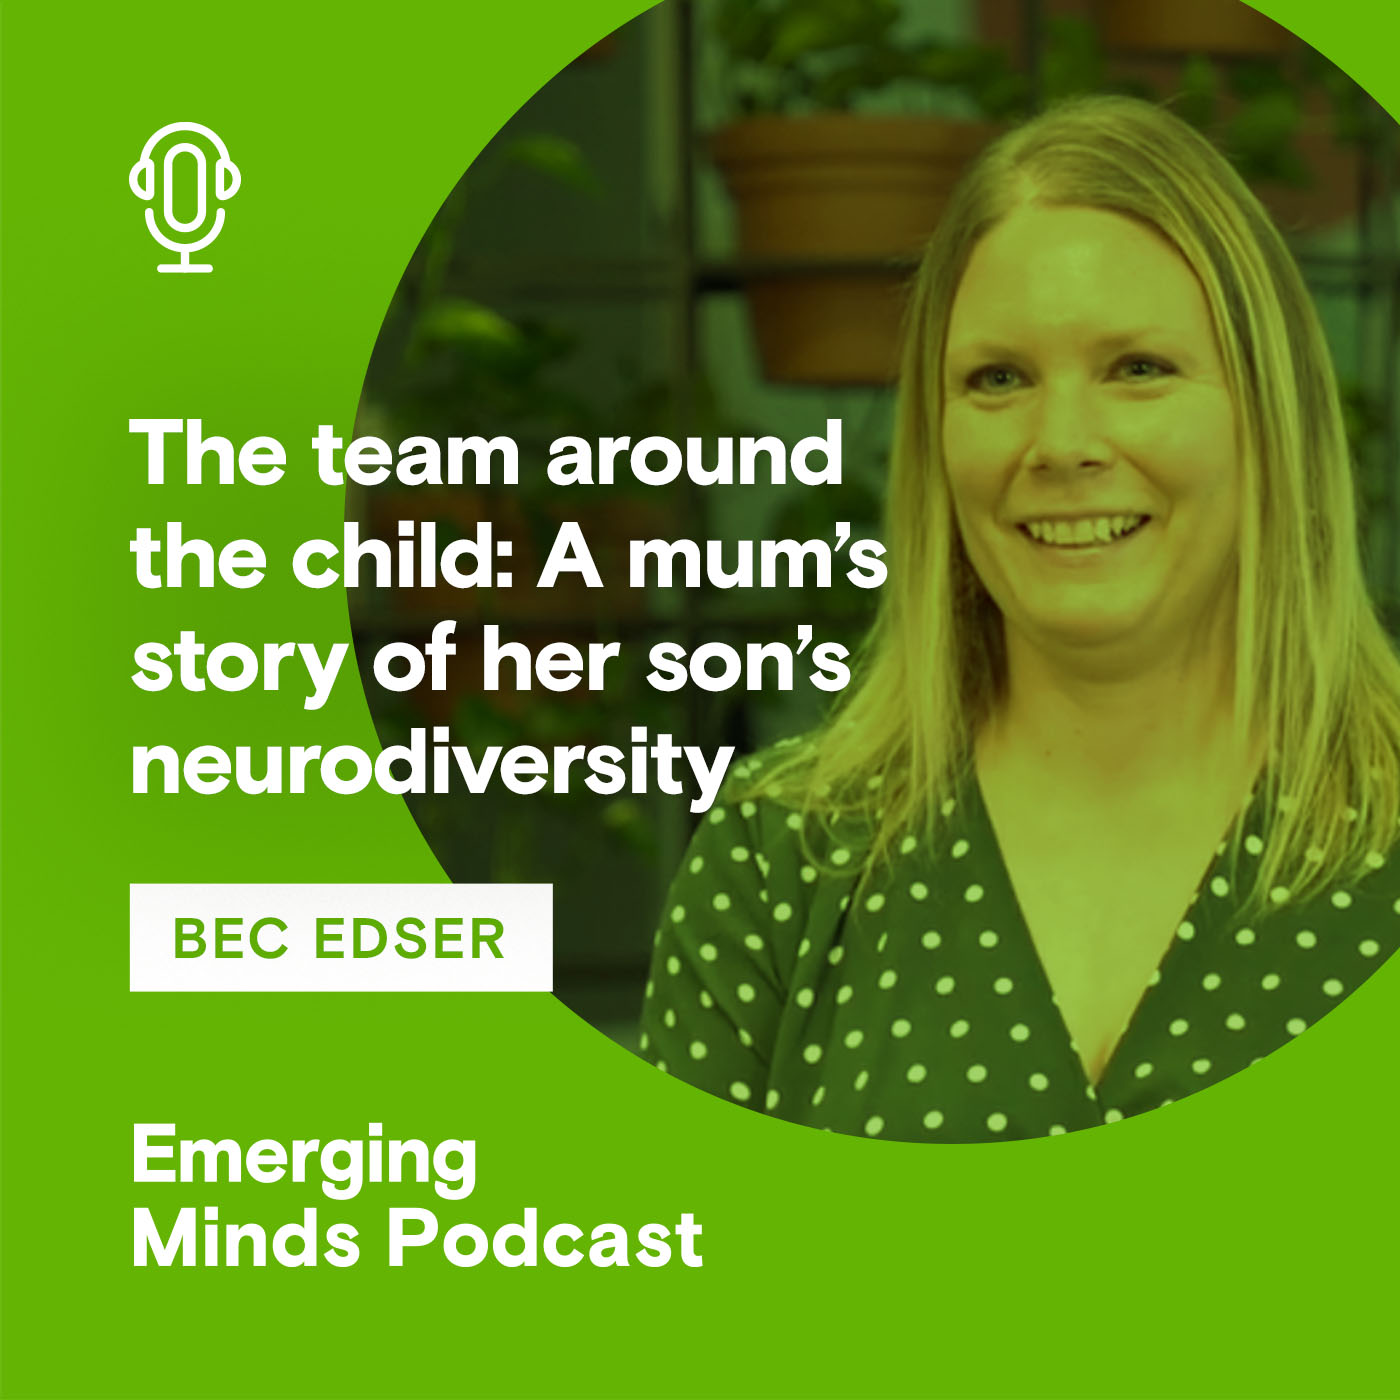 The team around the child: A mum's story of her son's neurodiversity